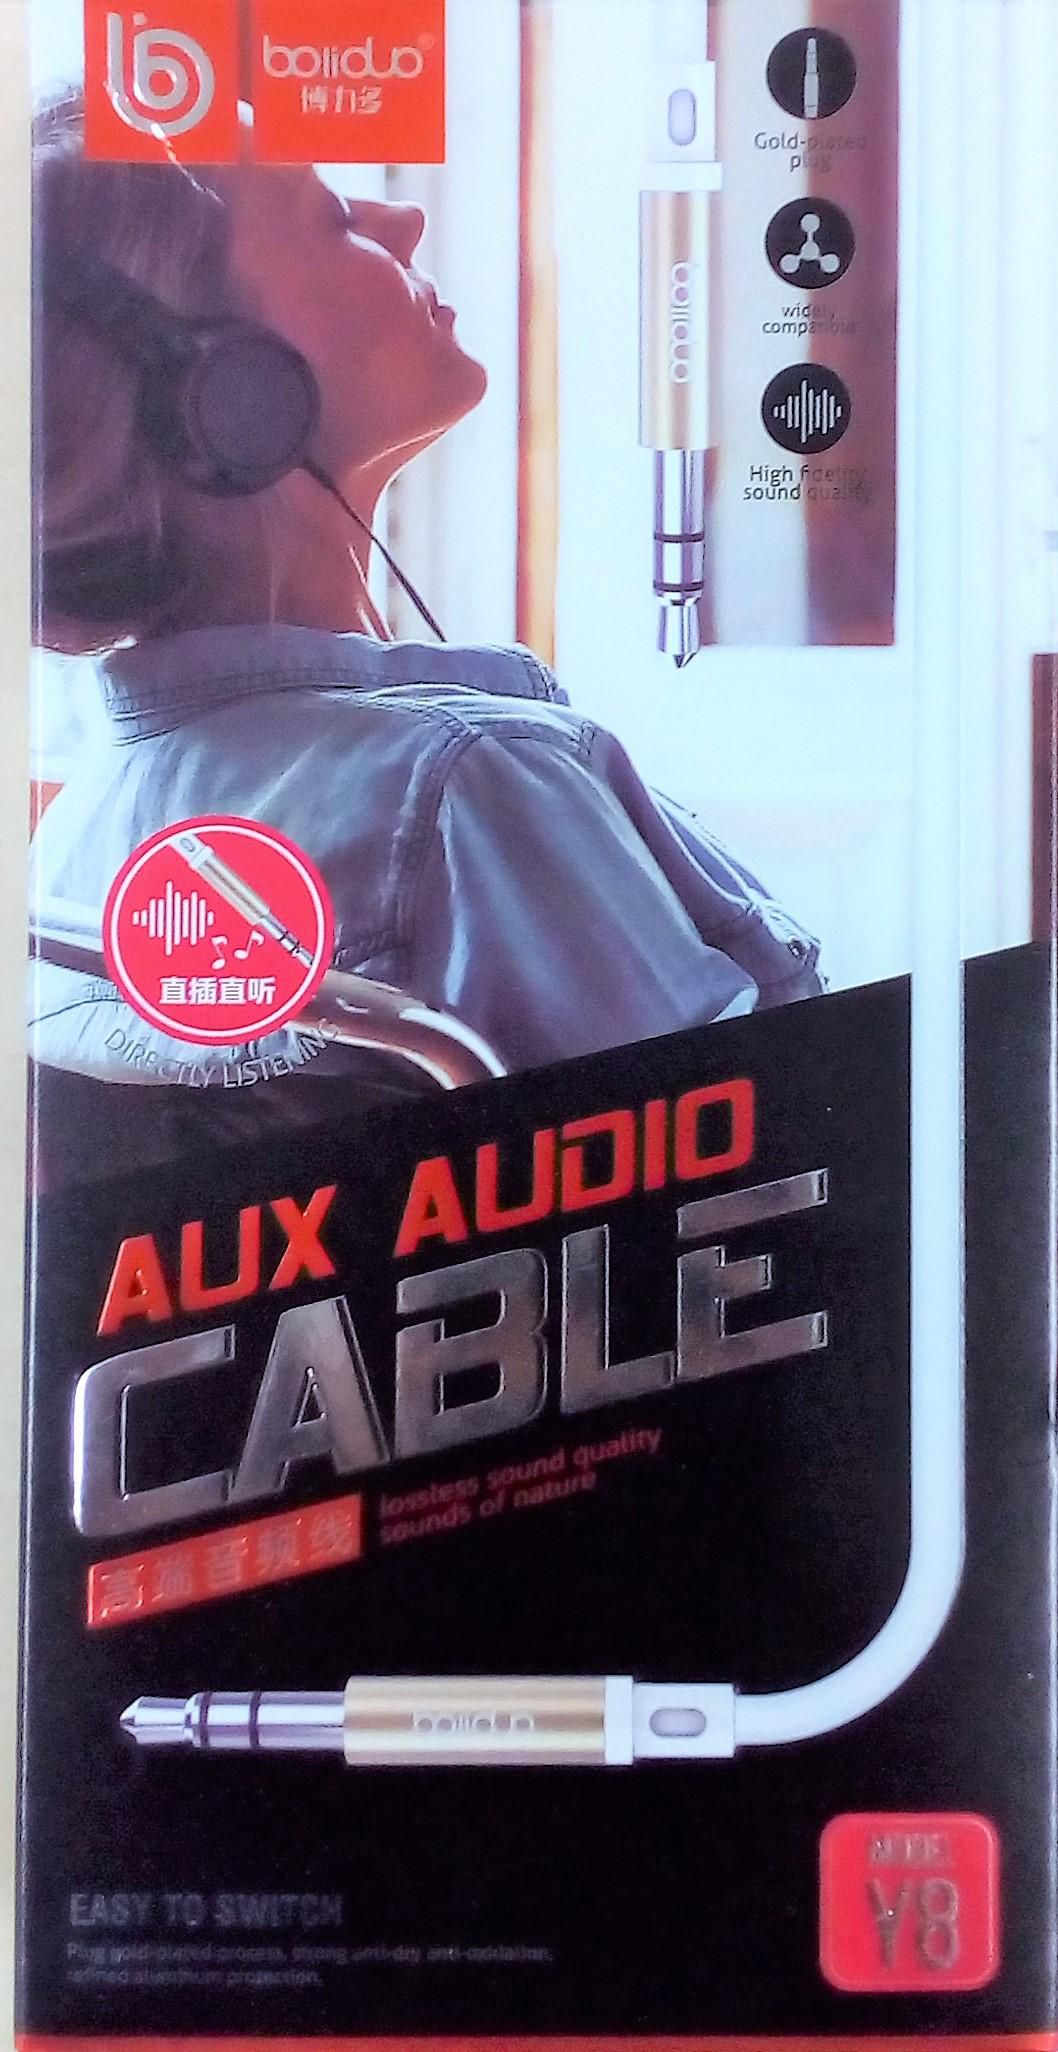 BOLIDUO AUX AUDIO CABLE  Y8 (White)